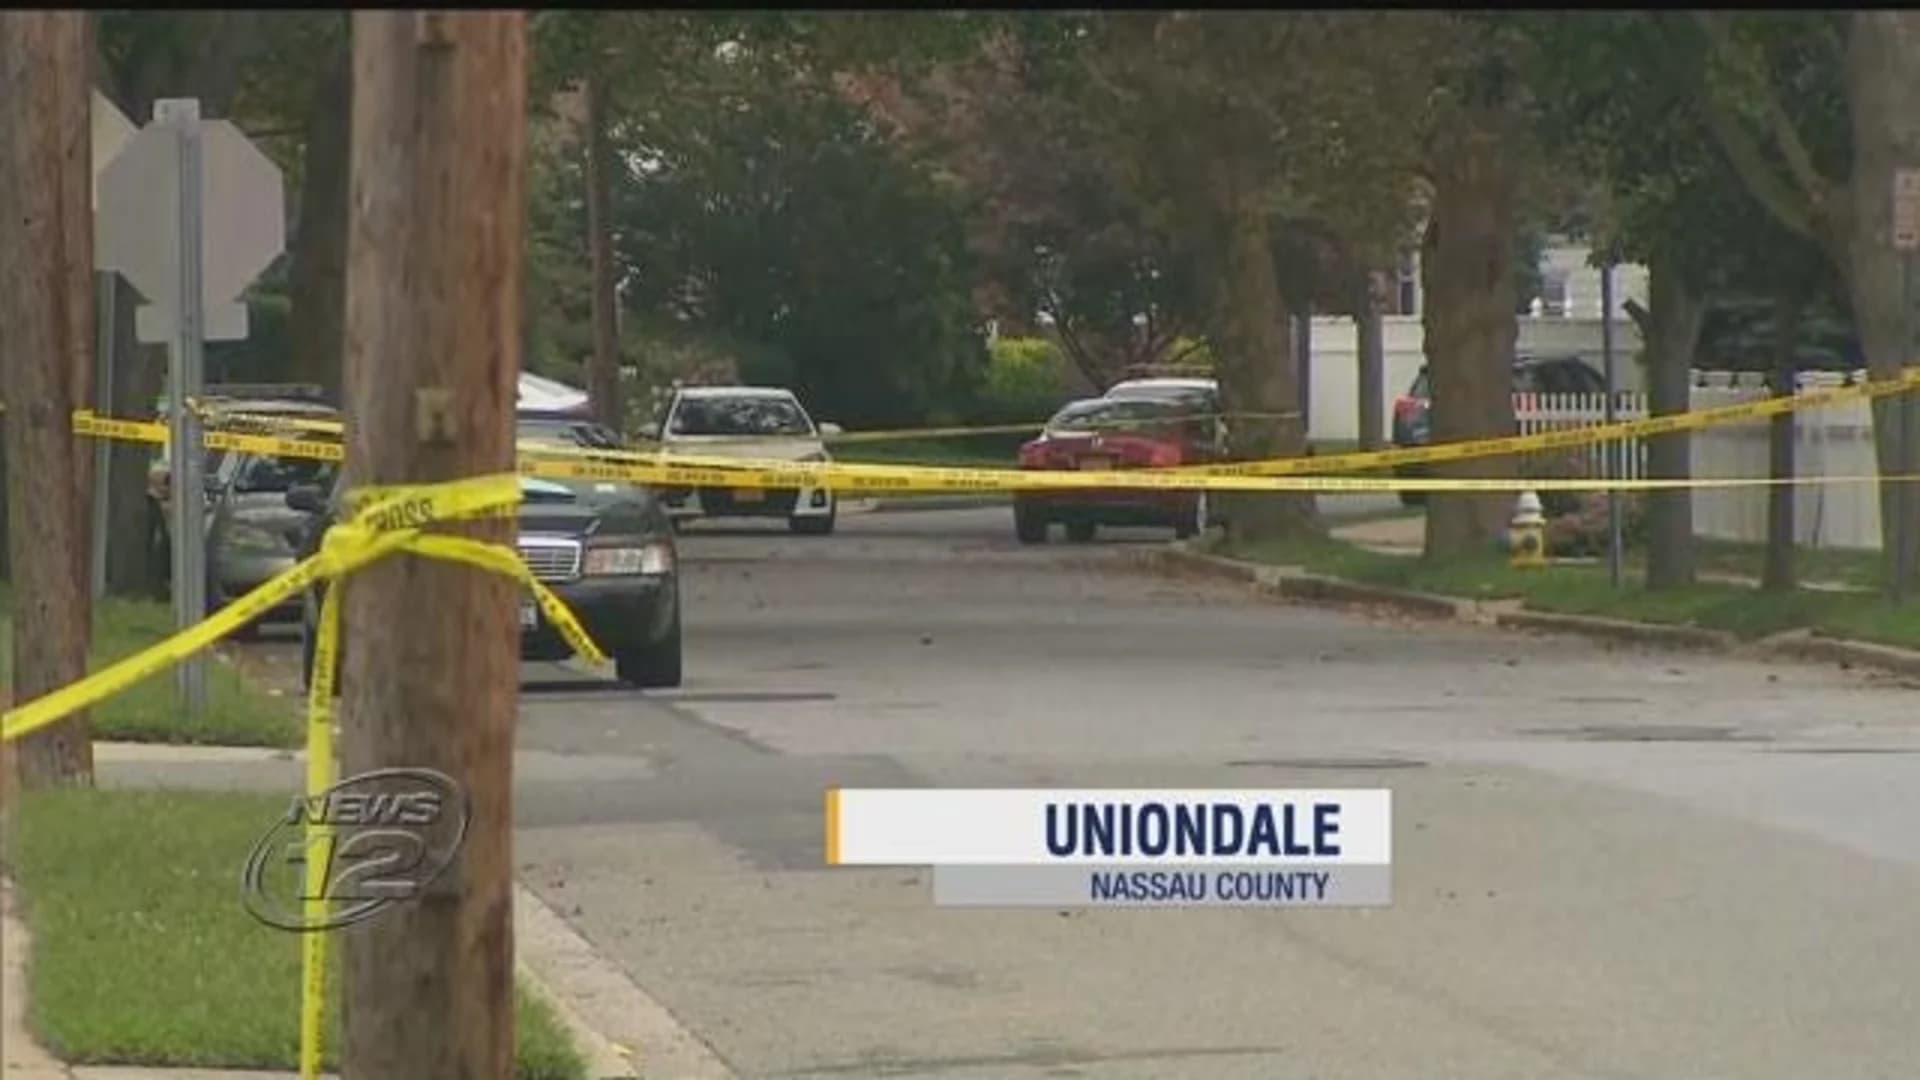 Police: 18-year-old fatally shot in Uniondale